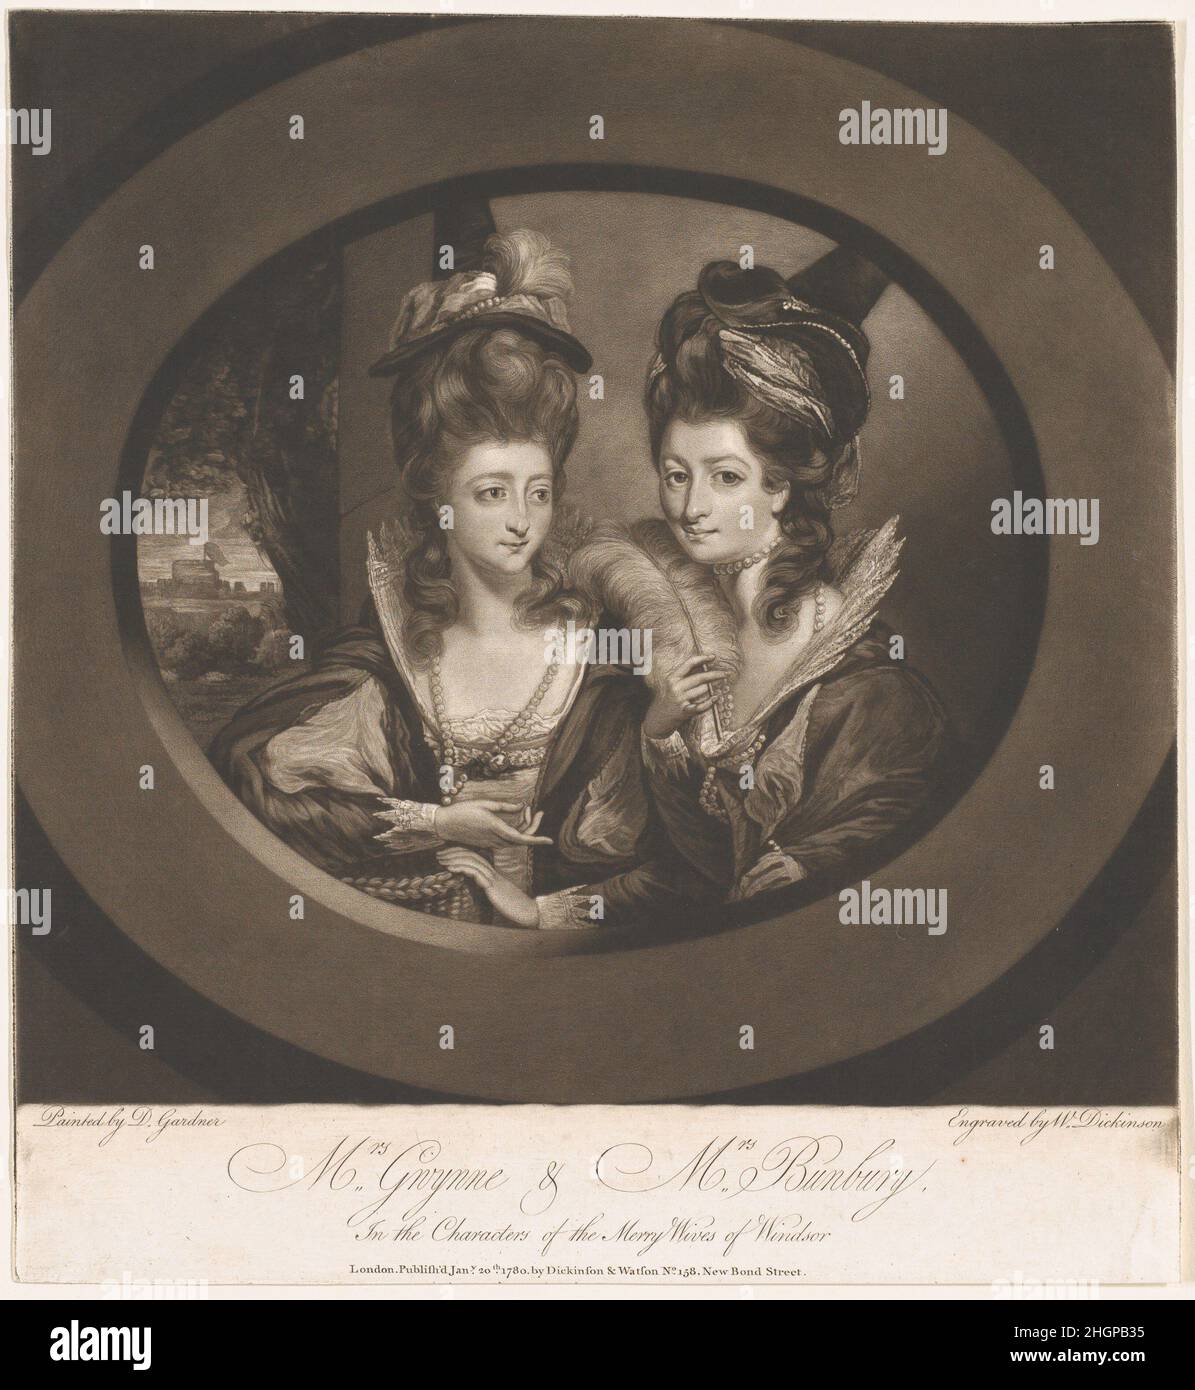 Mrs. Gwyn & Mrs. Bunbury in the Characters of The Merry Wives of Windsor 1780 William Dickinson The double portrait represents the sisters Mary and Catherine Horneck, who moved to London from Devon after their father's death, and were welcomed into the social circle of Sir Joshua Reynolds. In 1771, the younger sister Catherine married Henry William Bunbury, the gentleman artist-caricaturist. In 1779, Mary married Colonel Francis Edward Gwyn, who have distinguished himself in the American Revolutionary War. The sisters appear here in character as Mrs. Ford and Mrs. Page from Shakespeare's 'Merr Stock Photo